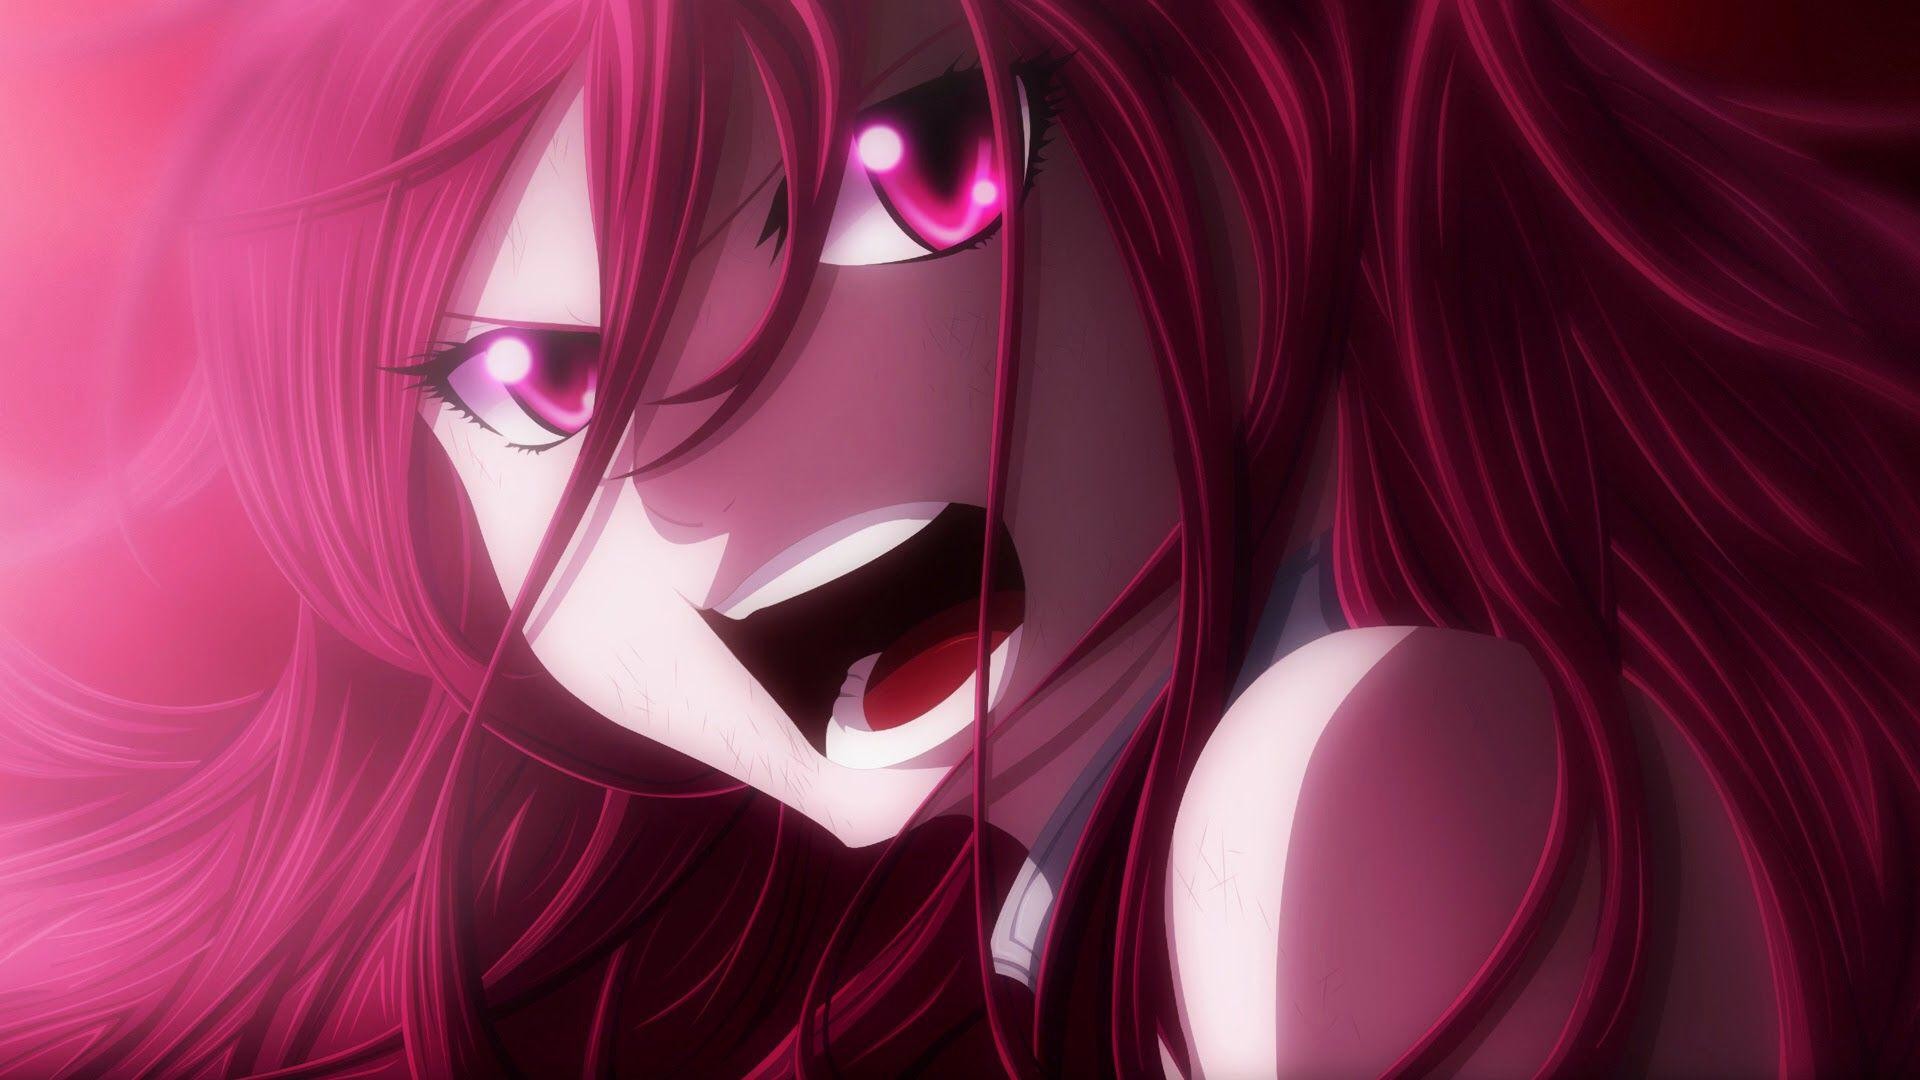 Erza-Scarlet-Fairy-Tail-wallpaper-wp6404907